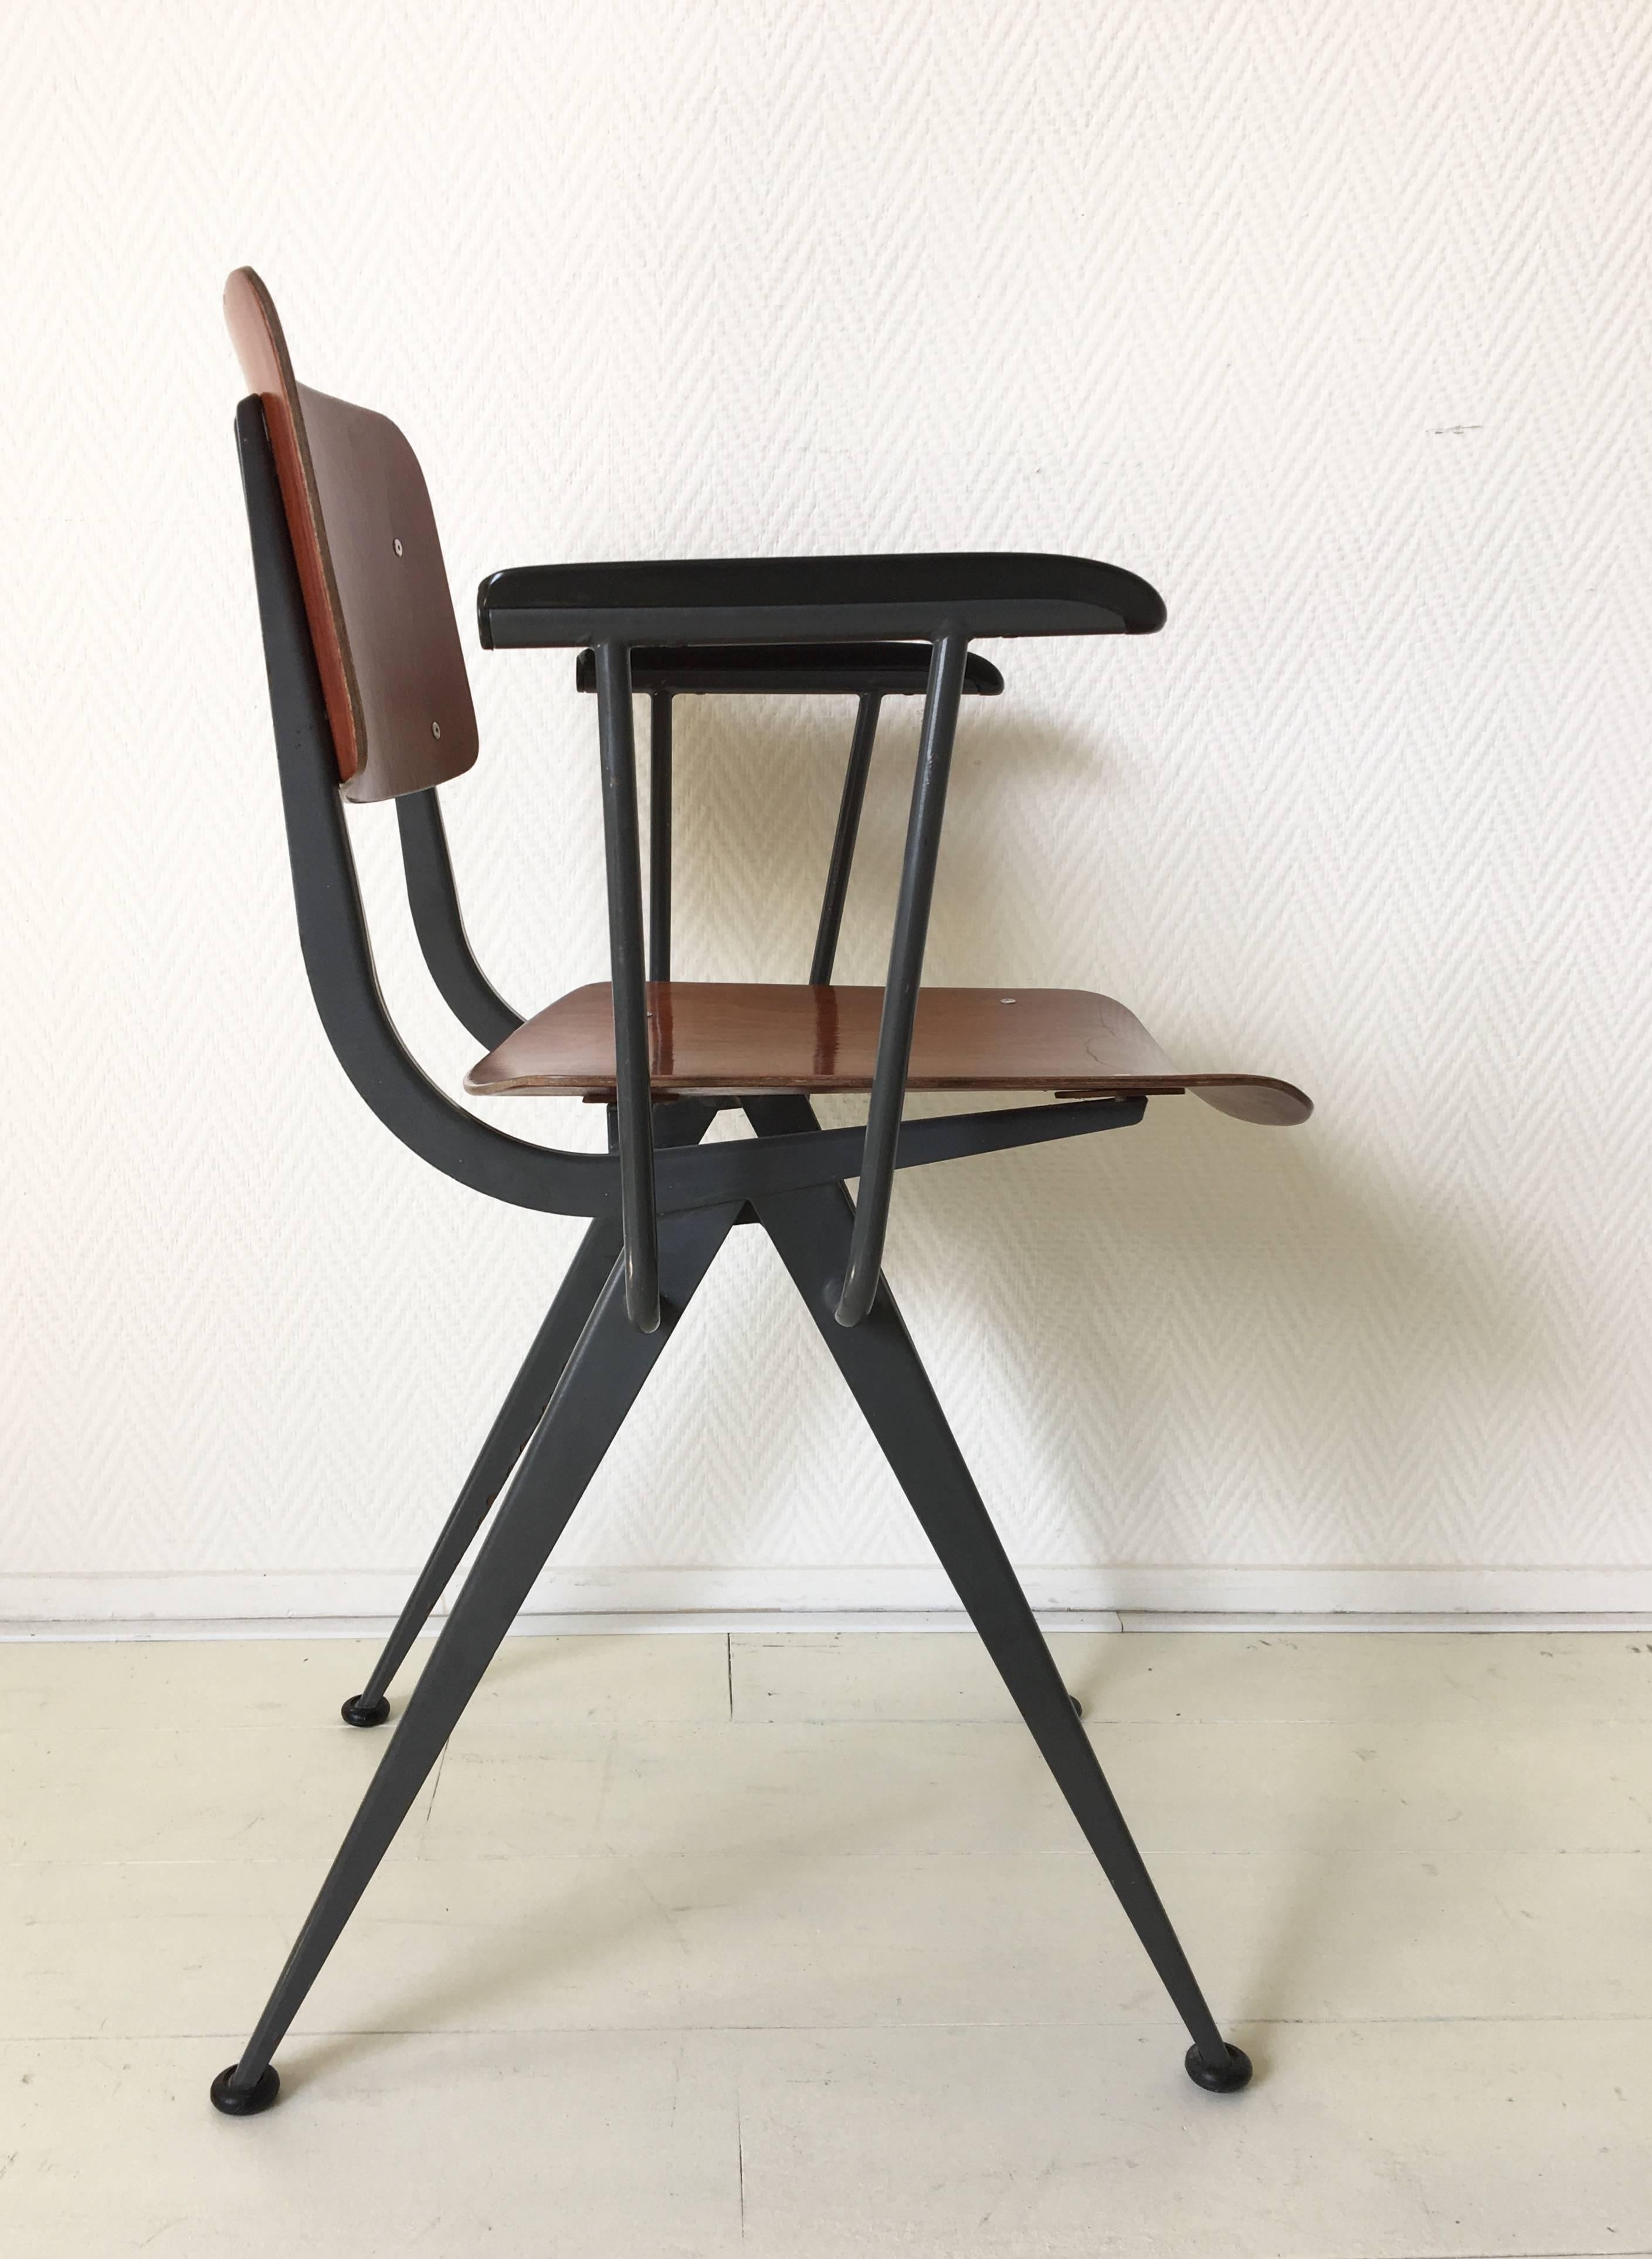 Midcentury Prouvé Inspired Industrial Armchair Attributed to Friso Kramer In Excellent Condition For Sale In Schagen, NL